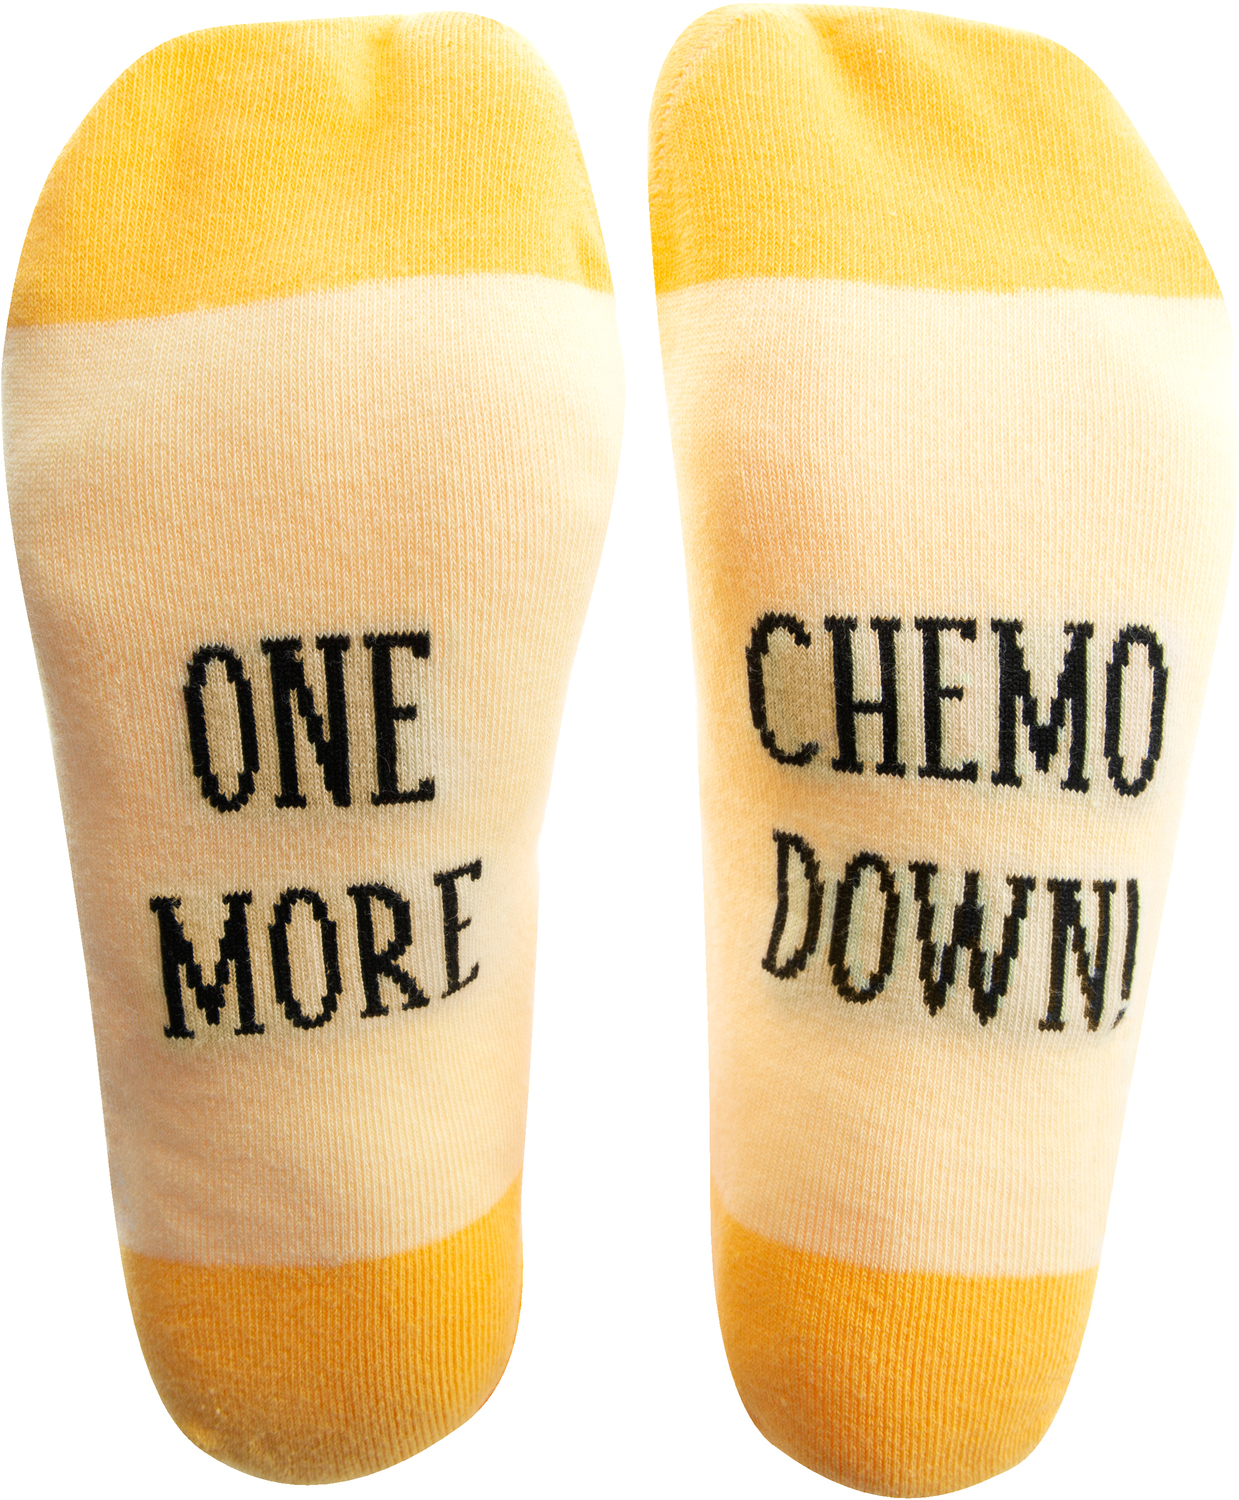 Chemo Down by Faith Hope and Healing - Chemo Down - S/M Unisex Sock